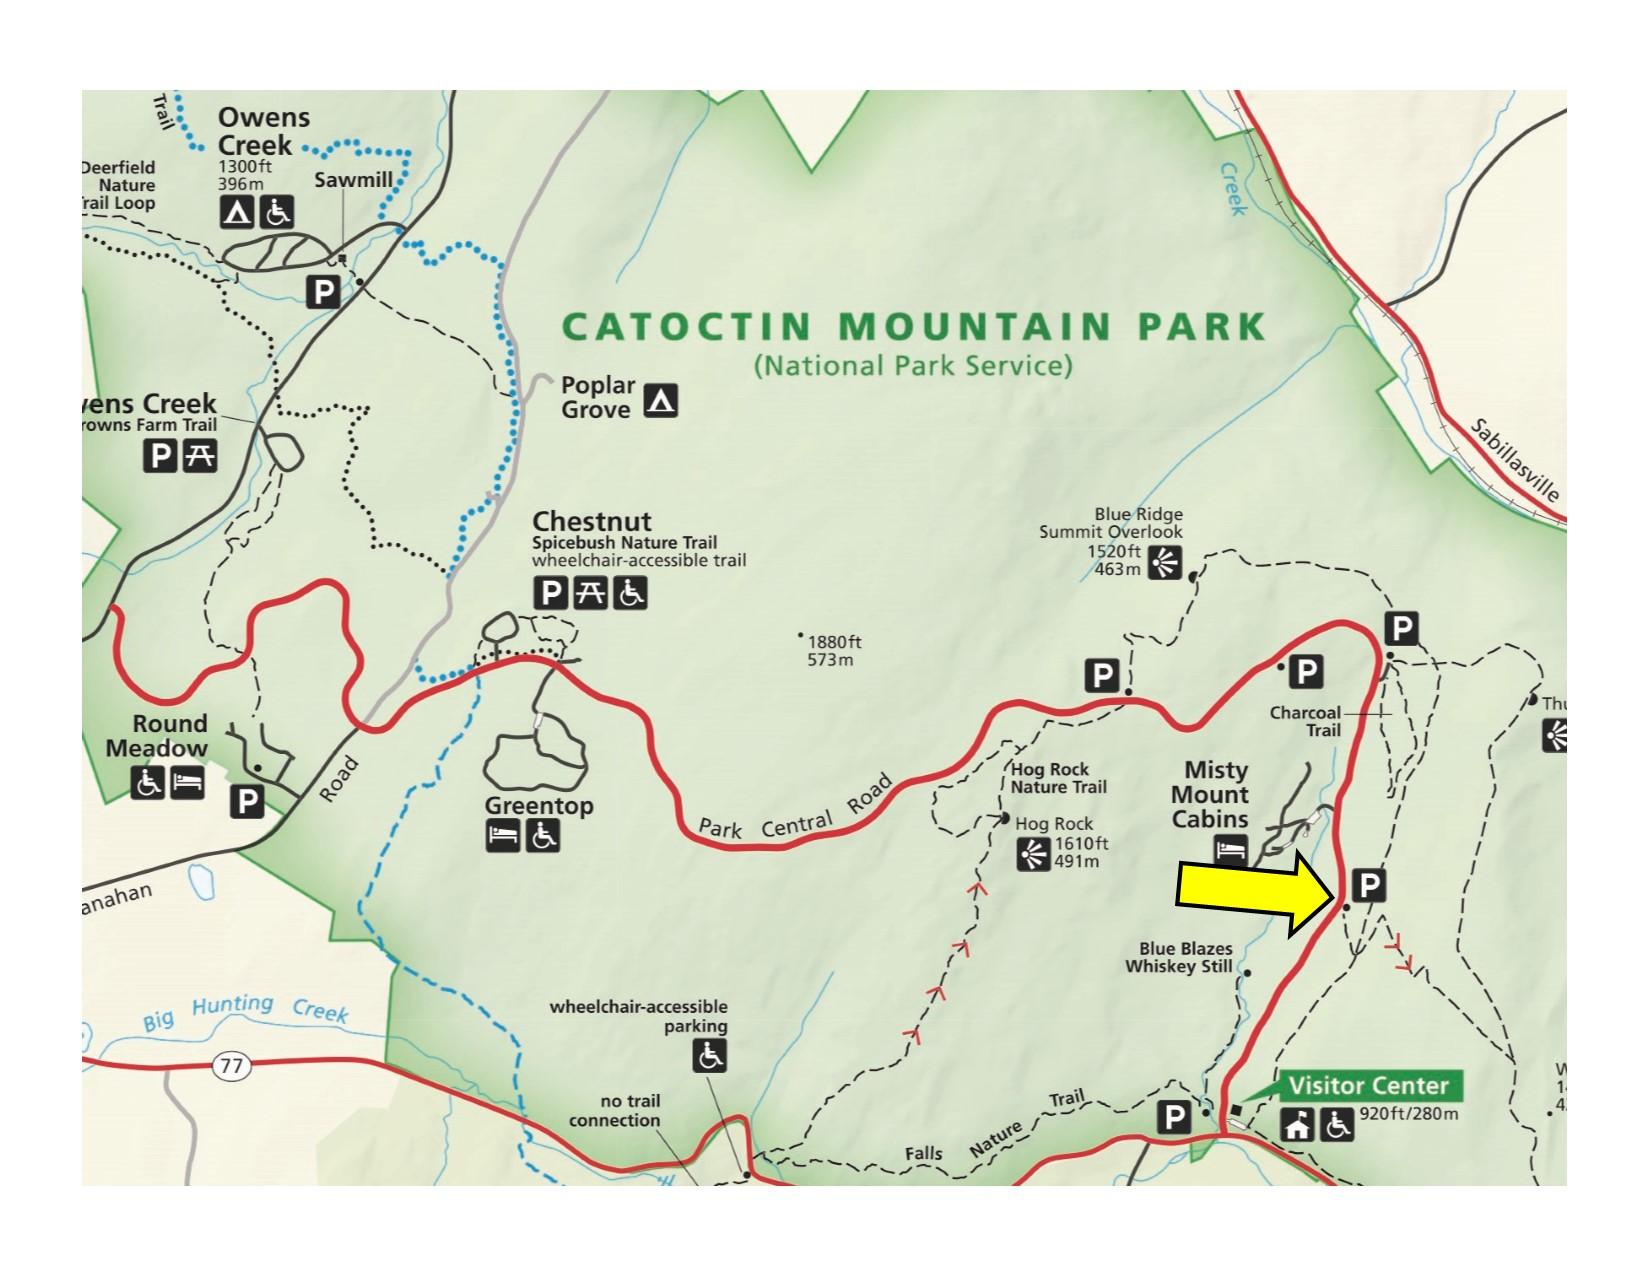 Park Map with a yellow arrow indicating location of parking area